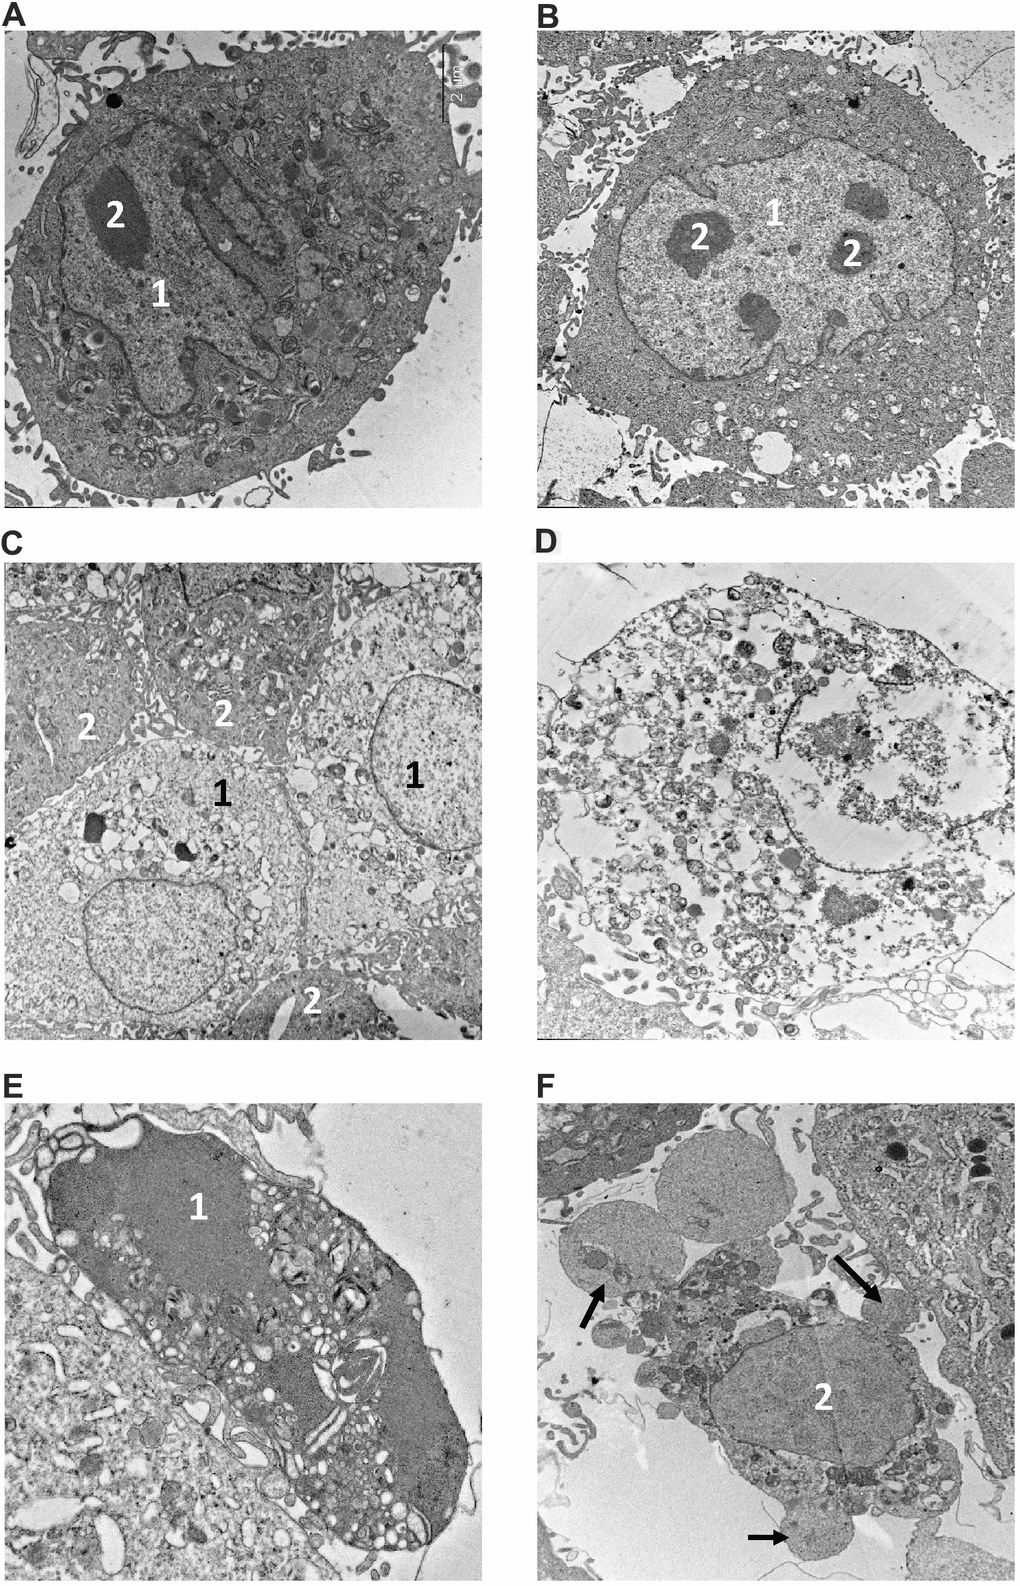 Electron microscopy analysis of MMU and NMR cells upon treatment with MMS. (A, B). The images of cells from NMR and mouse, that remained untreated, are shown. 1 – nucleus, 2 – nucleolus. (C–F). The images of cells after incubation with MMS. (C) swollen NMR cells (1) with cytoplasm of low electron density; and cells without signs of alteration (2) are shown. (D) necrotic mouse cell is shown, in which organelles are completely destroyed. Apoptosis of NMR (E) and mouse (F) cells. NMR cell nucleus (1) with condensed chromatin and organelles is shown, mouse cell demonstrates extensive “apoptotic blebbing” (“apoptotic blebs” are shown with arrows), 2 – nucleus without chromatin condensation but altered morphology.